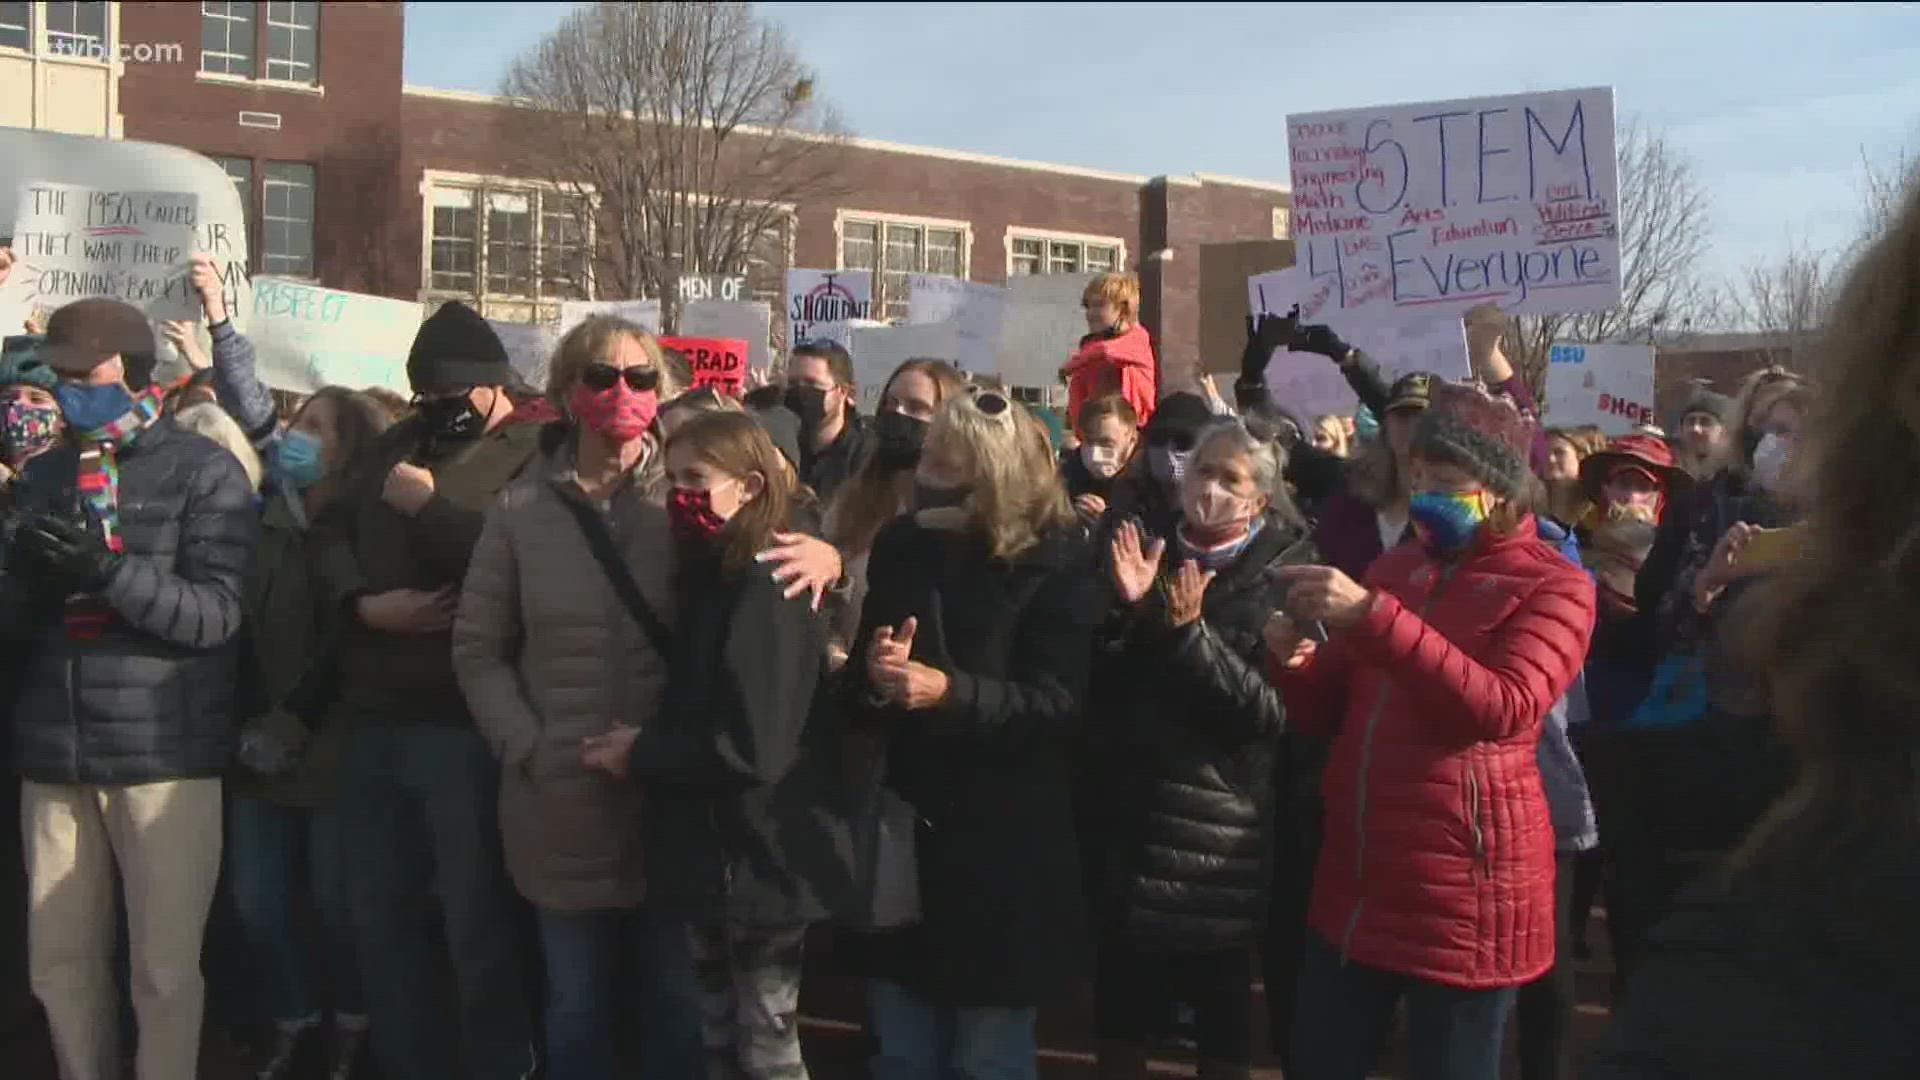 Hundreds of people came to the Boise State campus Saturday to rally in support of women.